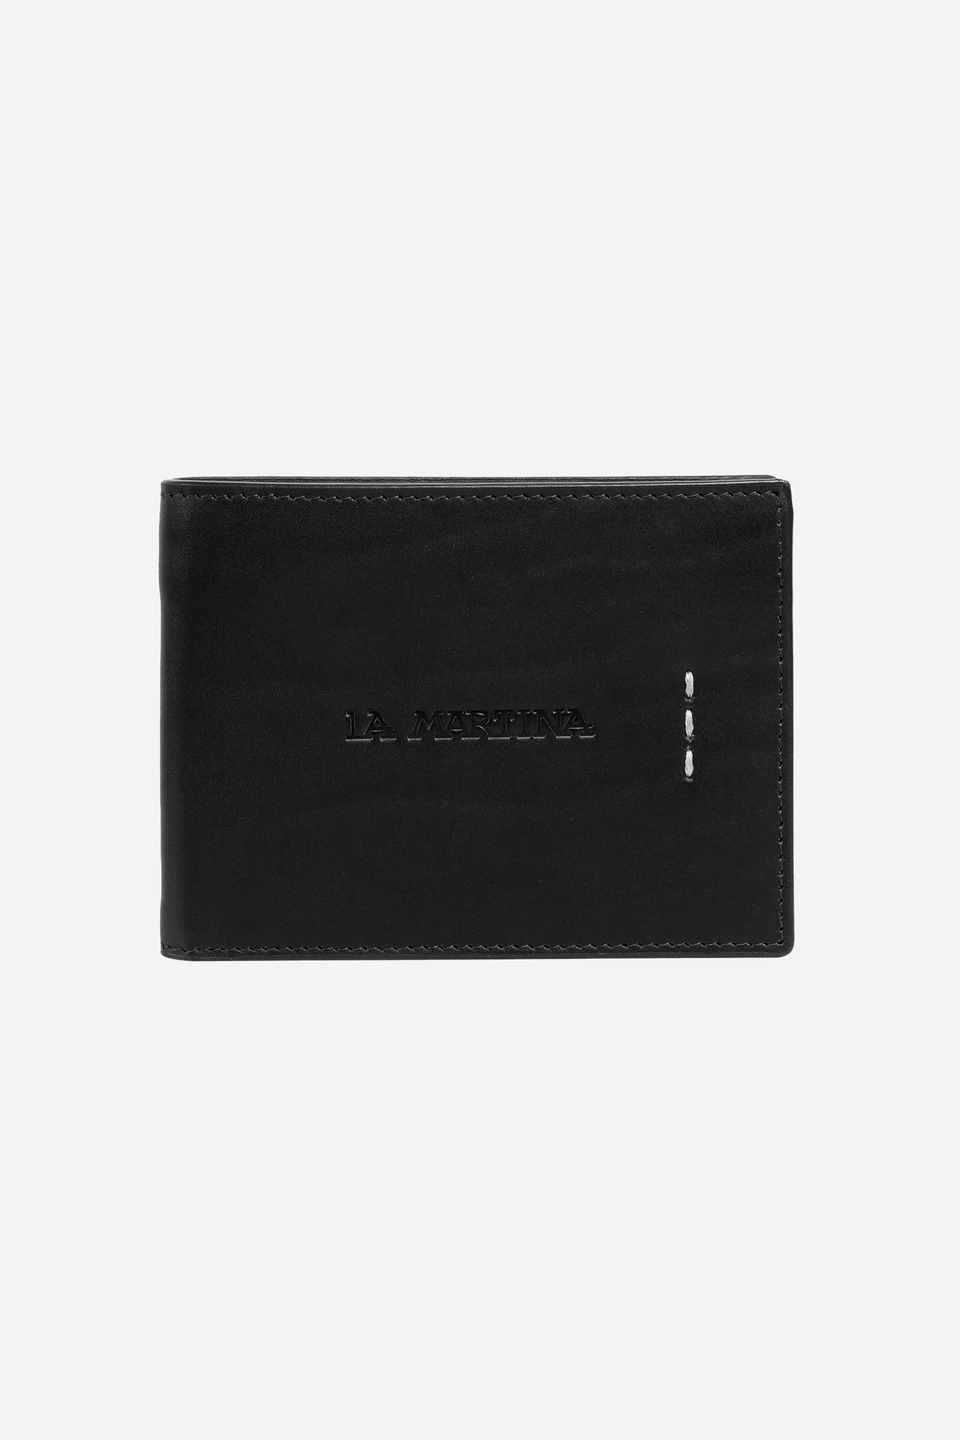 Latest and Stylish Men's Leather Wallets Online | Men's Wallets | Trifold  Wallet for Men |